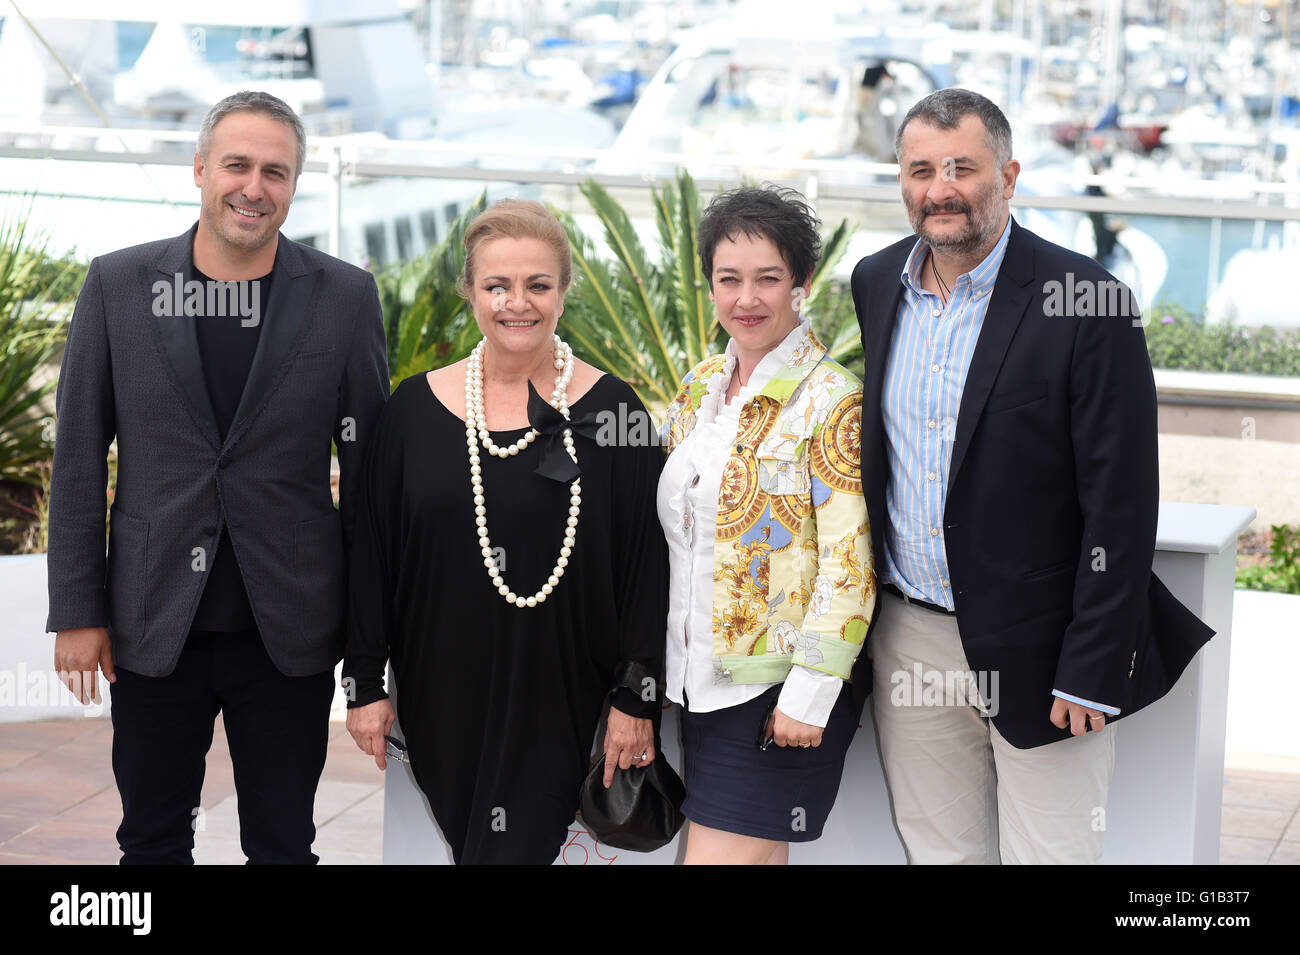 Cannes, France. 12th May, 2016. Actor Mimi Branescu, (l-r) actress Dana  Dogaru, producer Anca Puiu and director Cristi Puiu attends at the  photocall "Sieranevada (Roumanie)" at the 69th Annual Cannes Film Festival